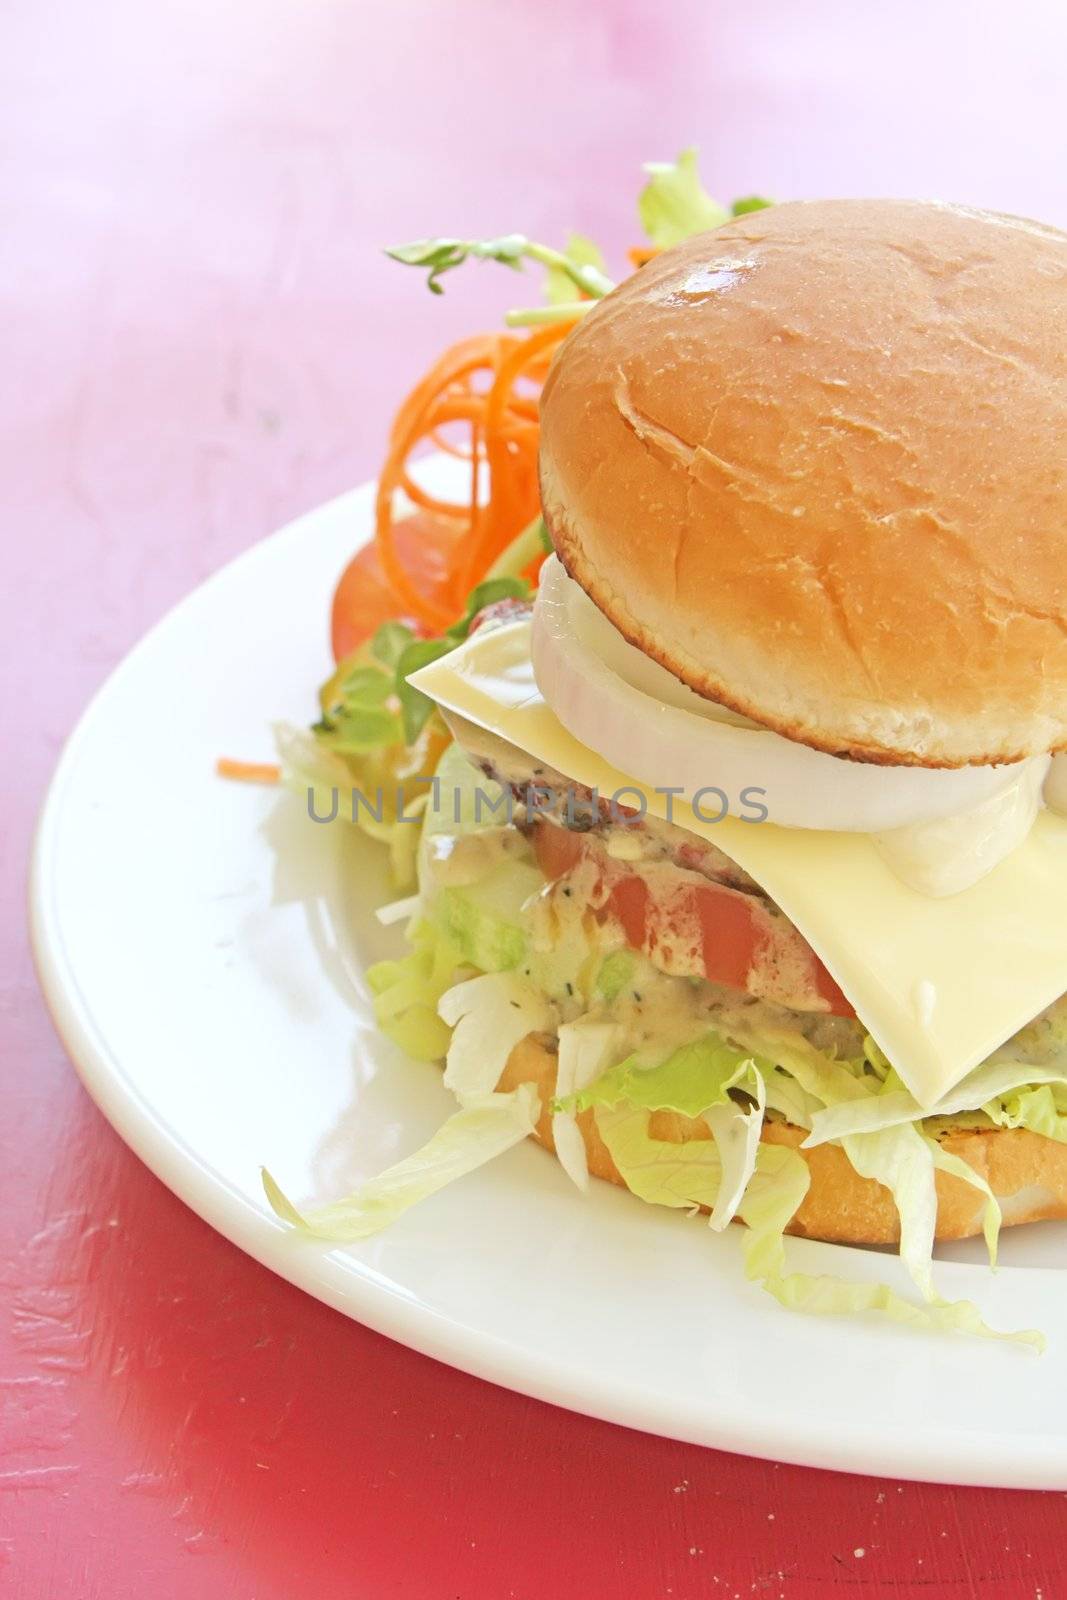 Vegetarian Burger With French Fries by kentoh